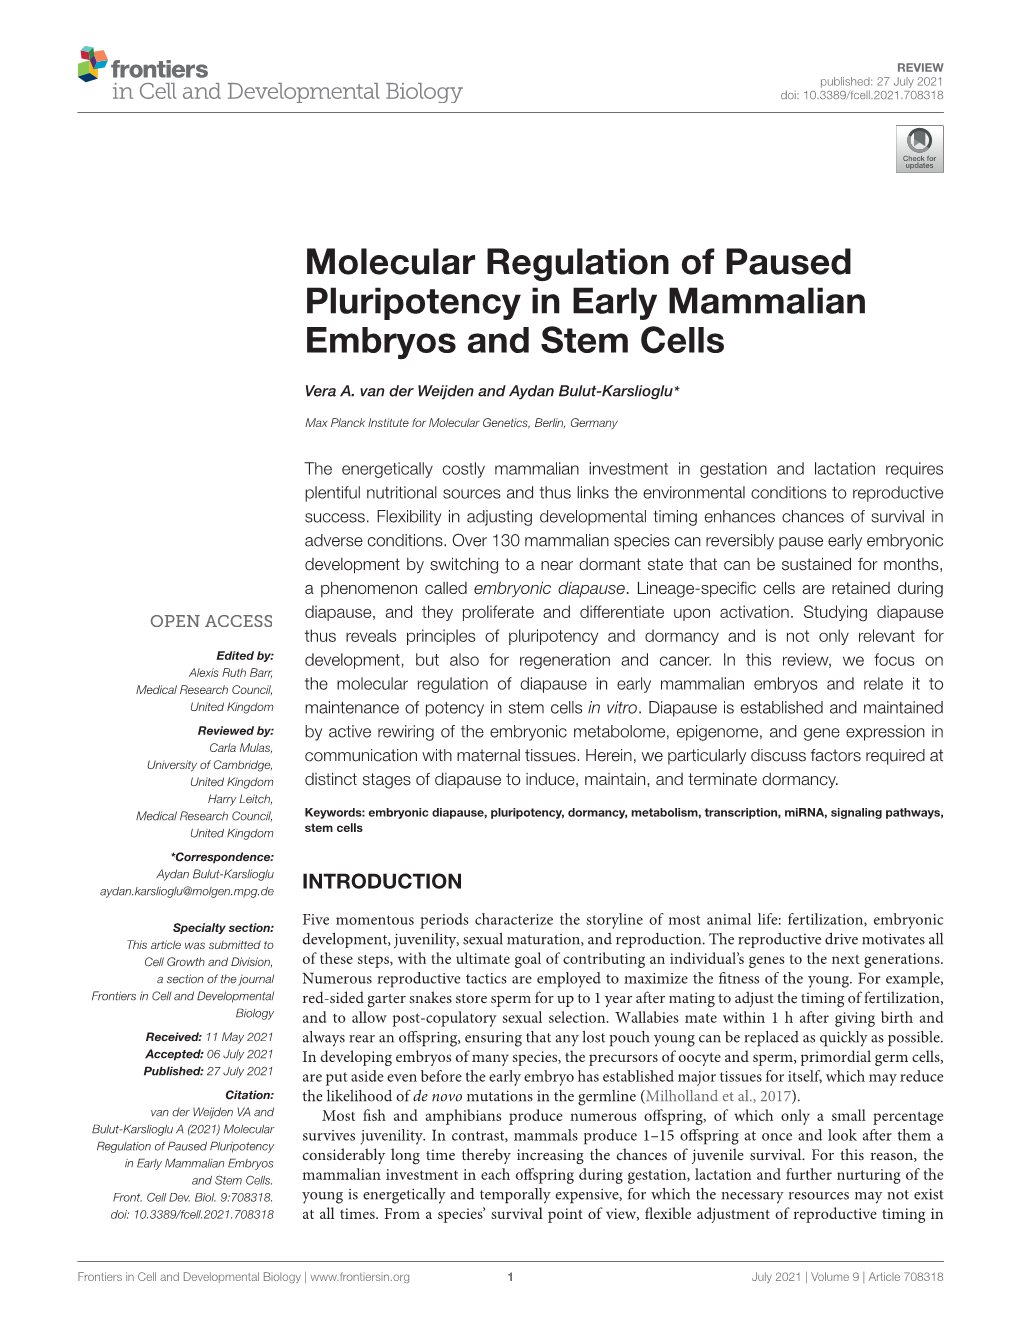 Molecular Regulation of Paused Pluripotency in Early Mammalian Embryos and Stem Cells